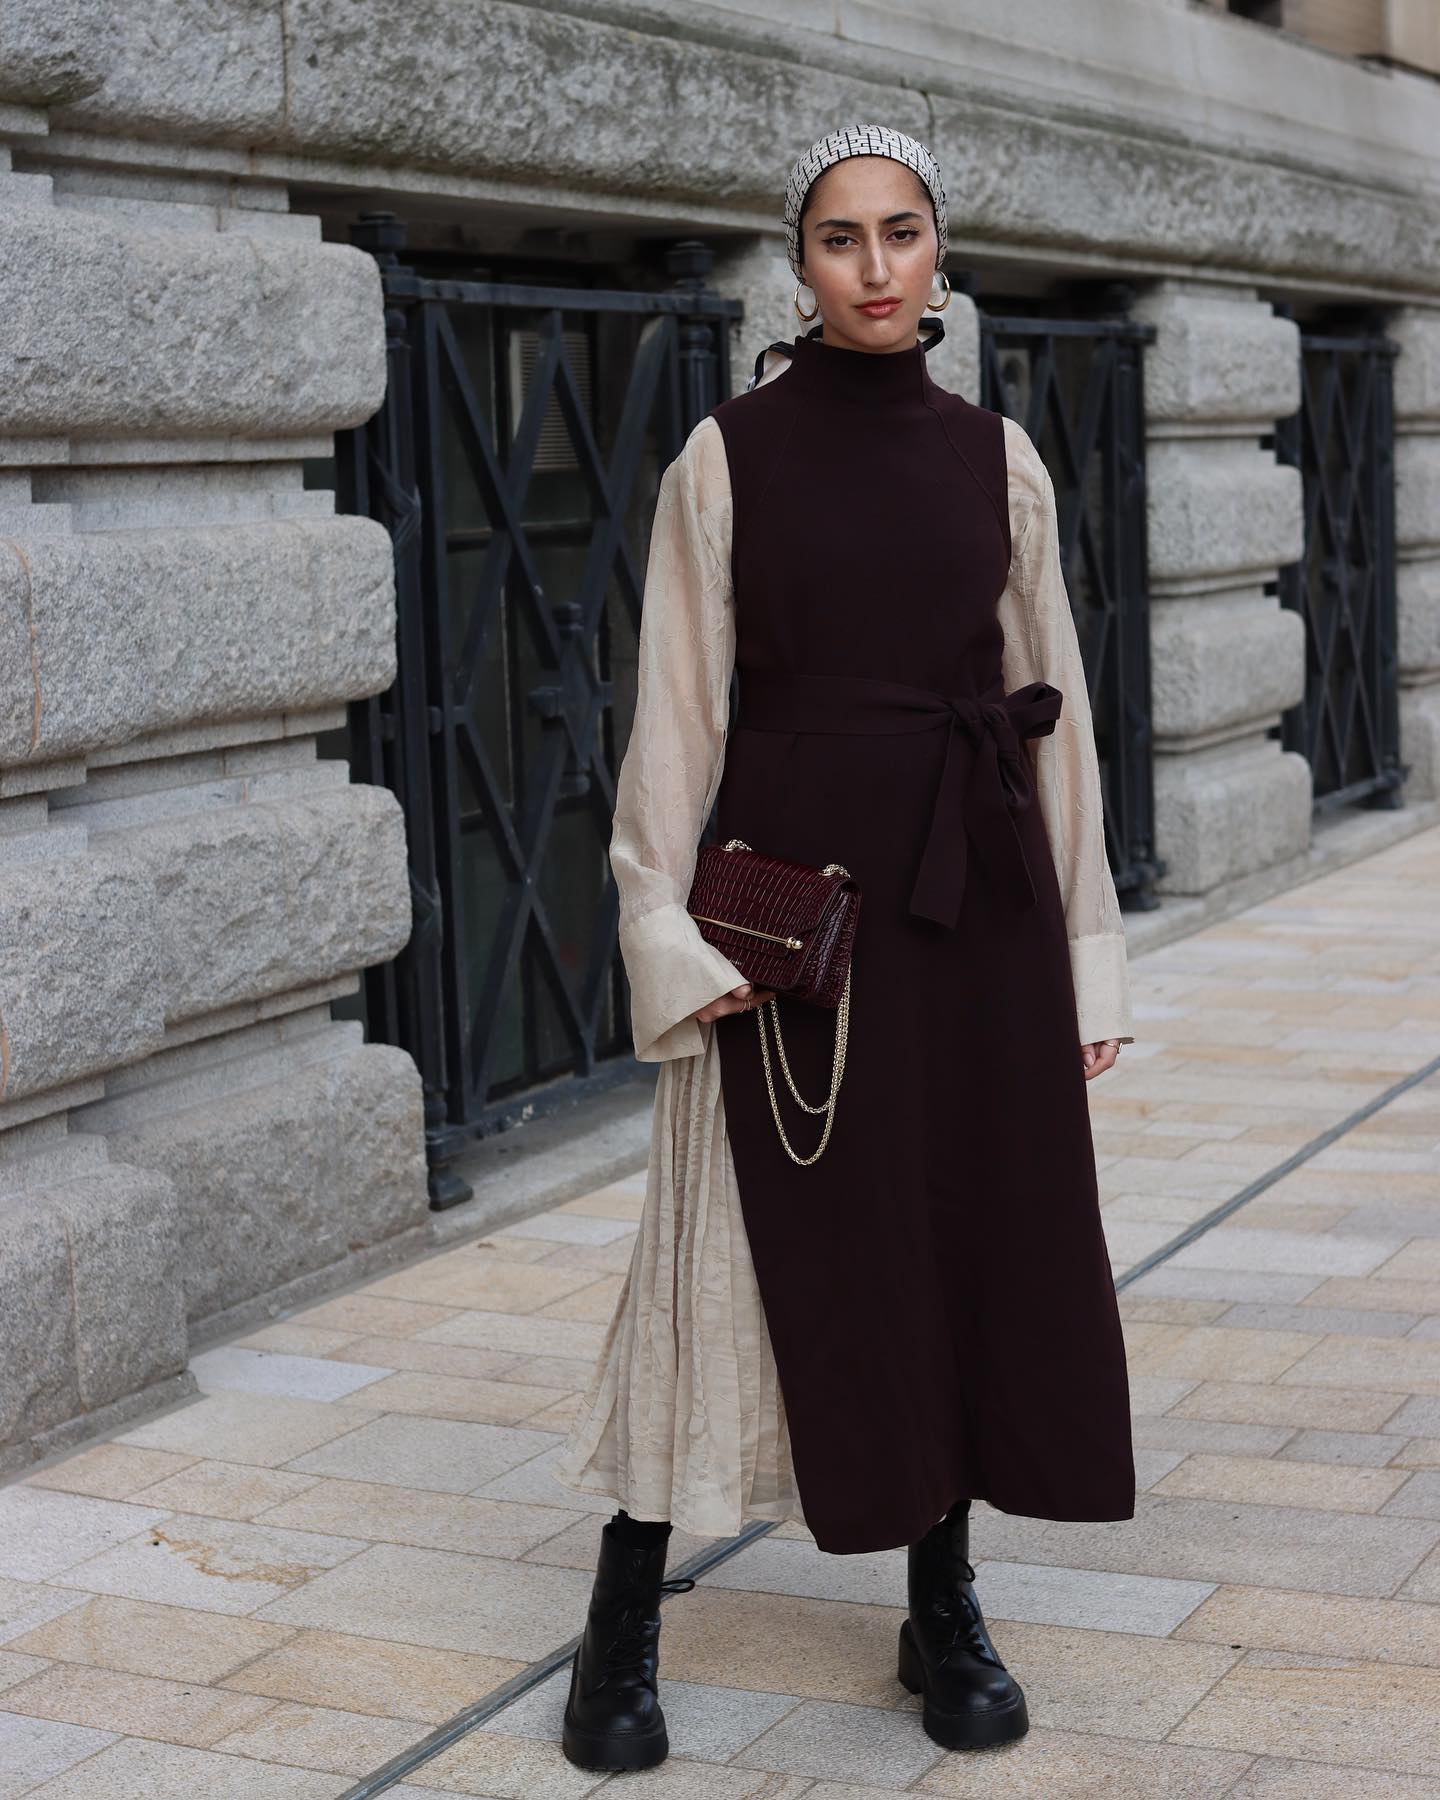 These 7 Photogenic Autumn Outfits Will Get You So Many Compliments